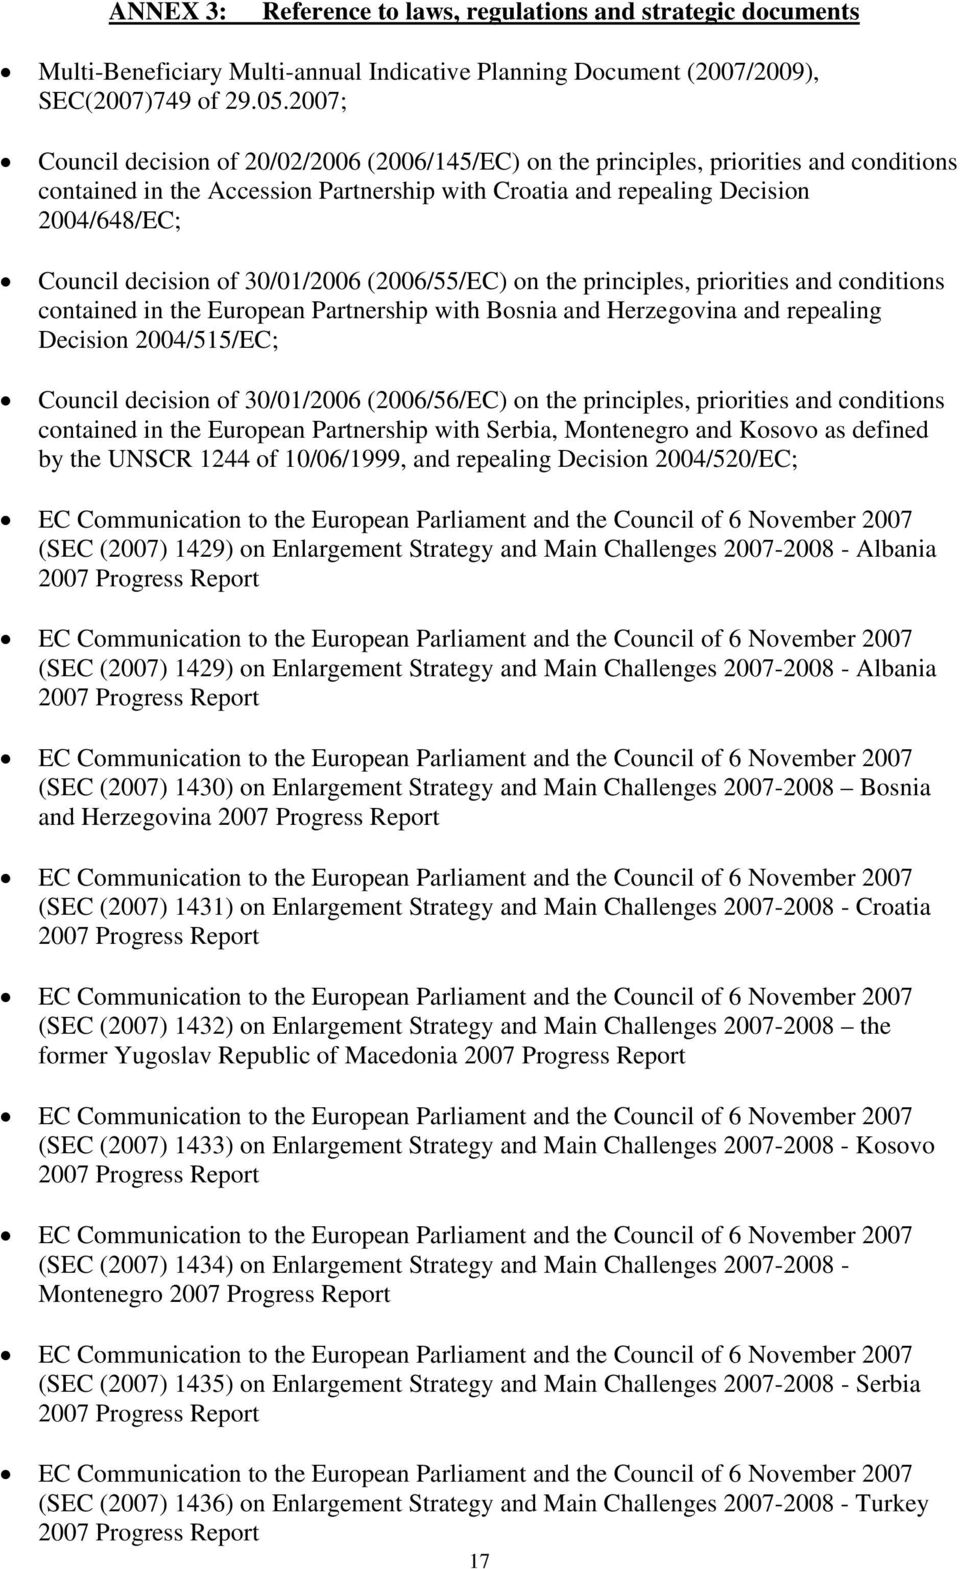 decision of 30/01/2006 (2006/55/EC) on the principles, priorities and conditions contained in the European Partnership with Bosnia and Herzegovina and repealing Decision 2004/515/EC; Council decision